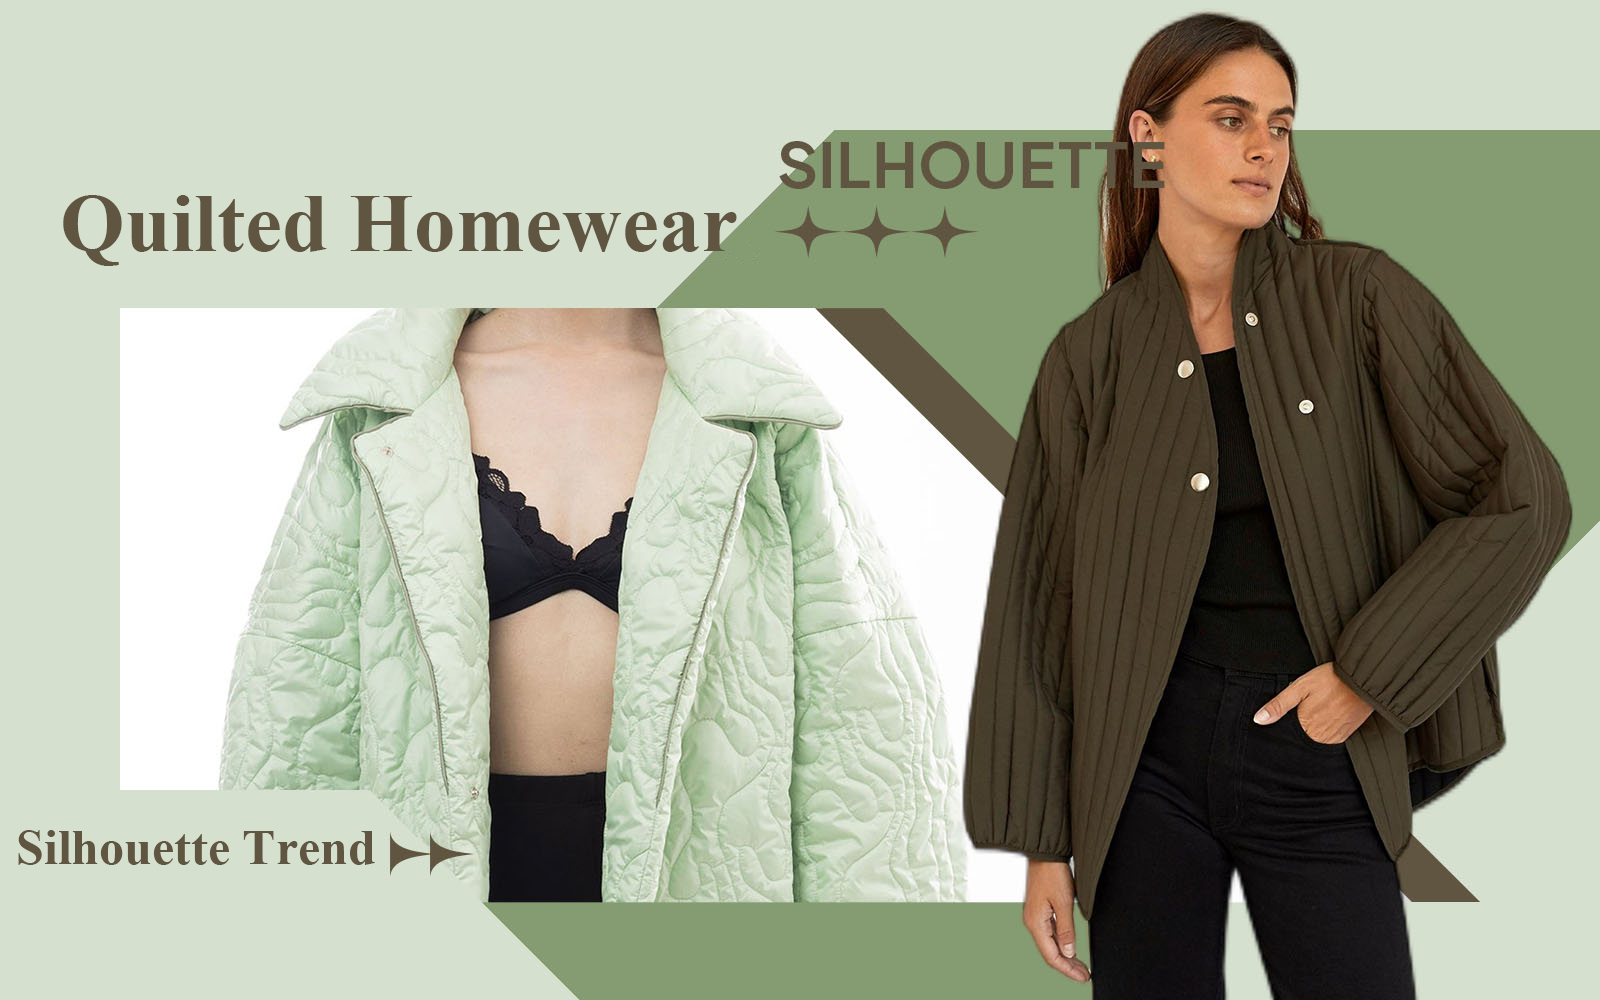 The Silhouette Trend for Women's Quilted Homewear